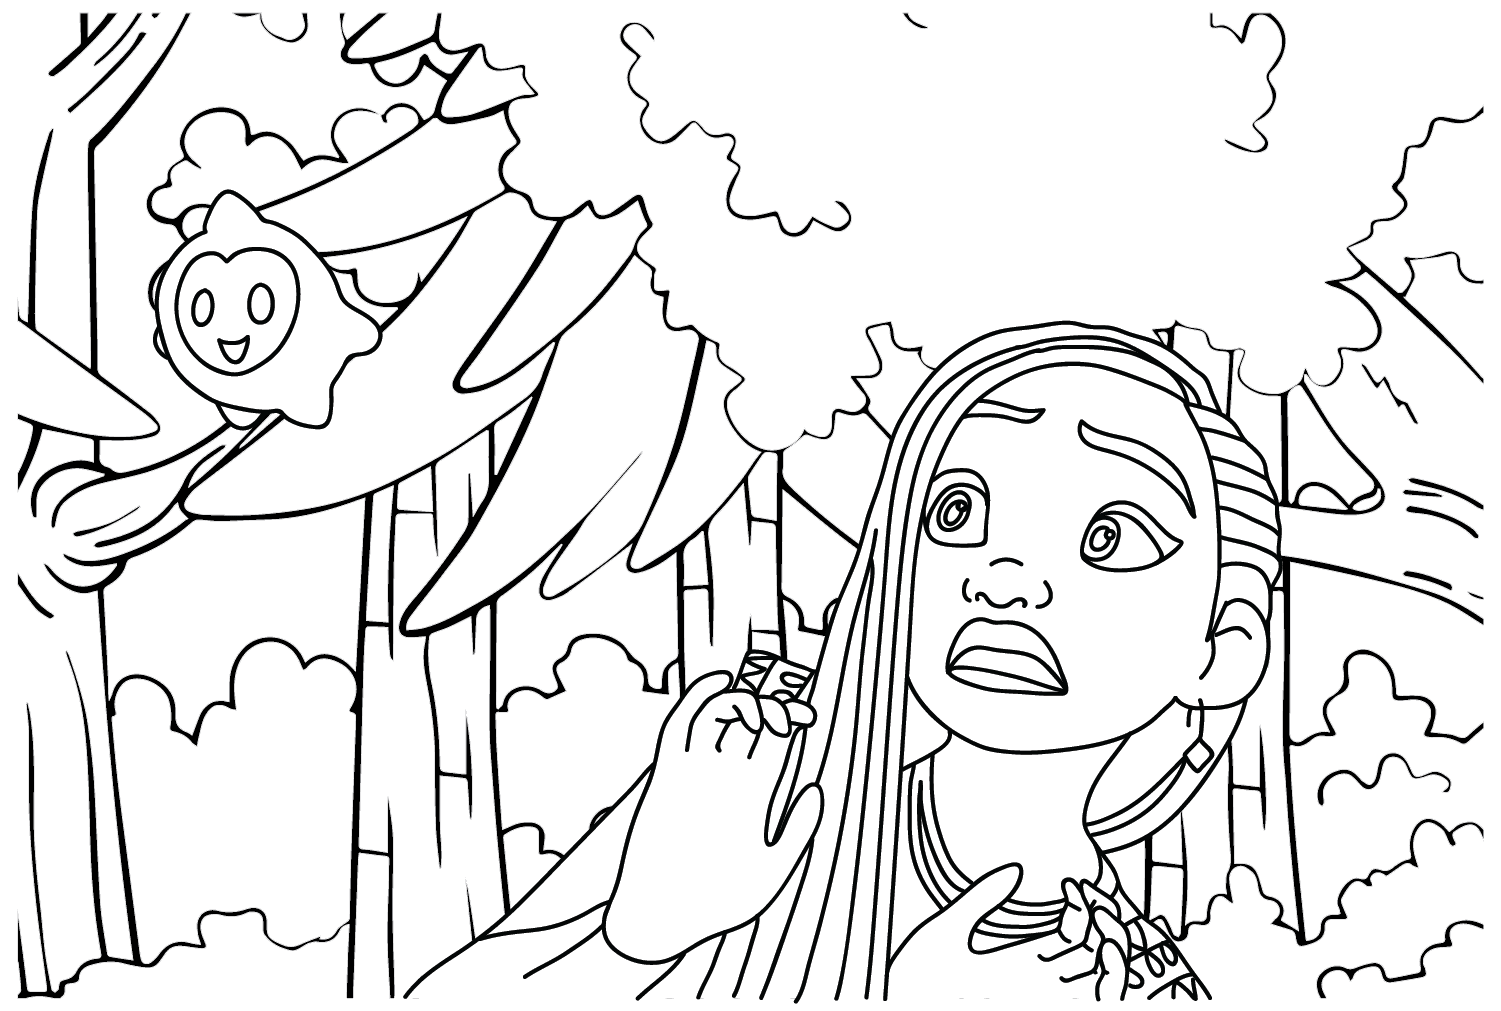 Asha and Star Coloring Page from Wish